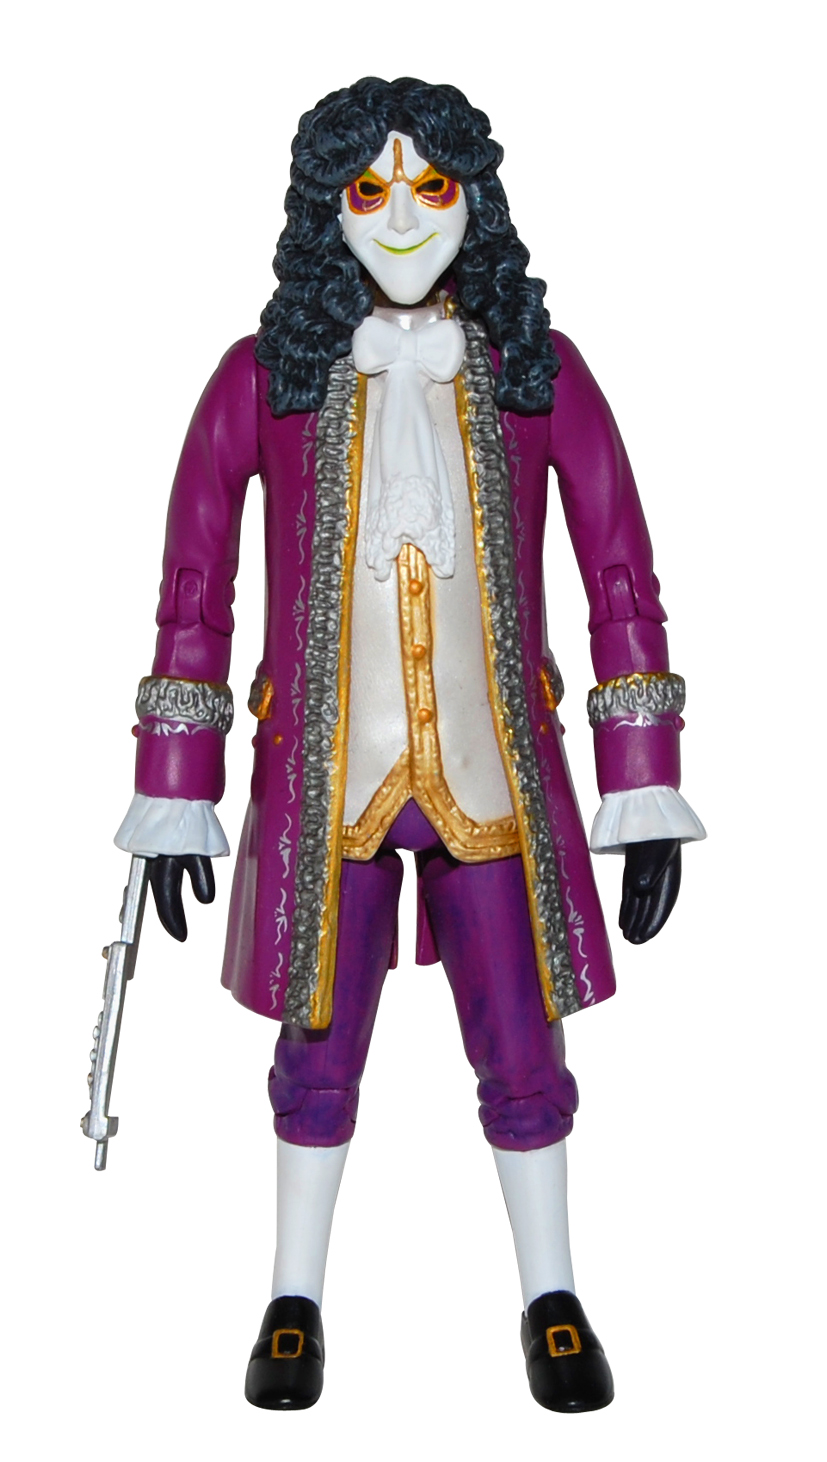 Unbranded Collect and Build Figs1 2and3- Purple Clockwork